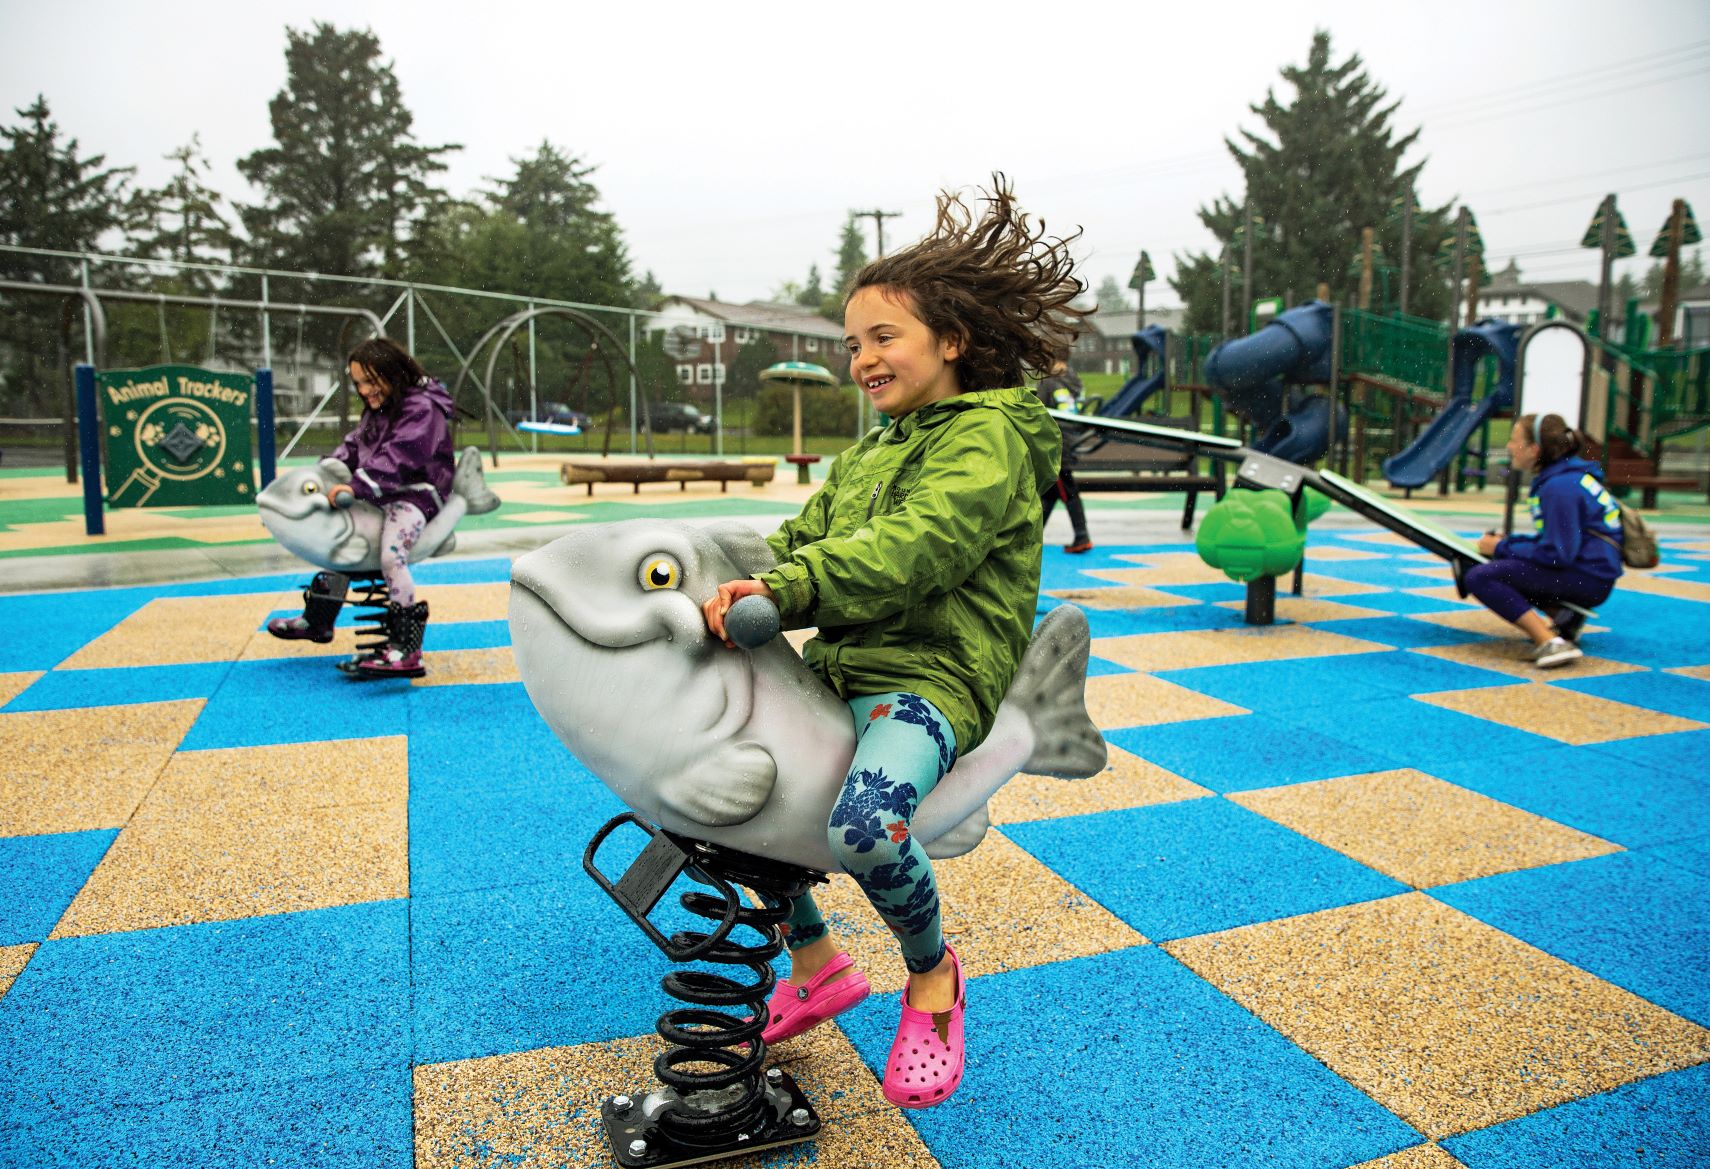 A child plays on a spring rider on an interlocking rubber tiled surface.